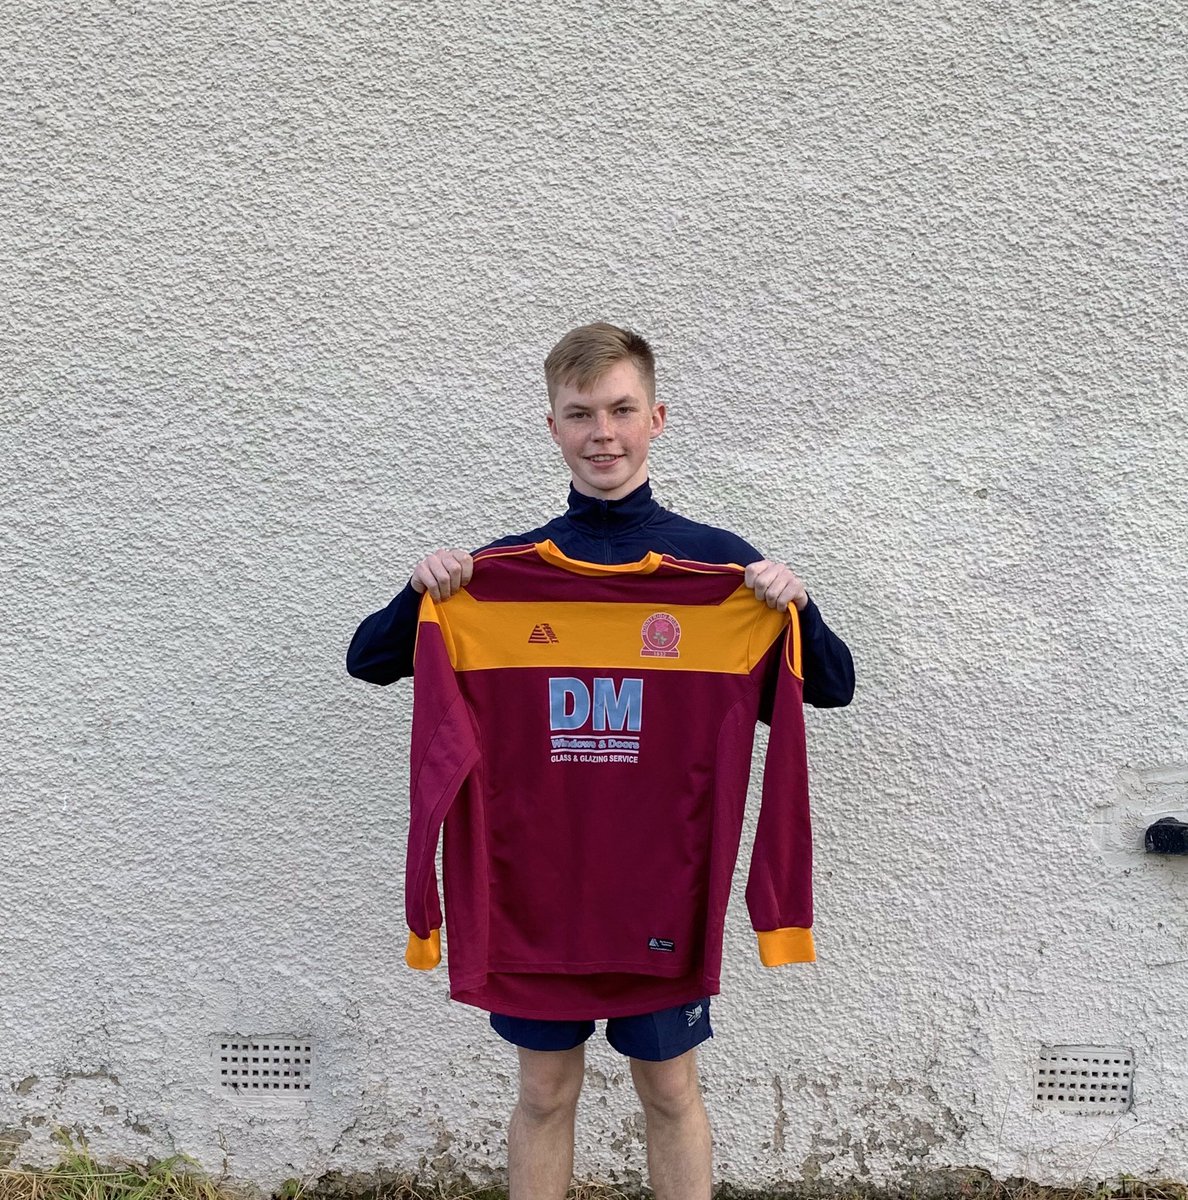 ✍️ Finally for tonight we have Struan Ritchie. A versatile player capable of playing in a number of positions, Struan often finds himself in dangerous areas in the opposition half. His pace and dribbling ability makes him a real threat from wide areas.